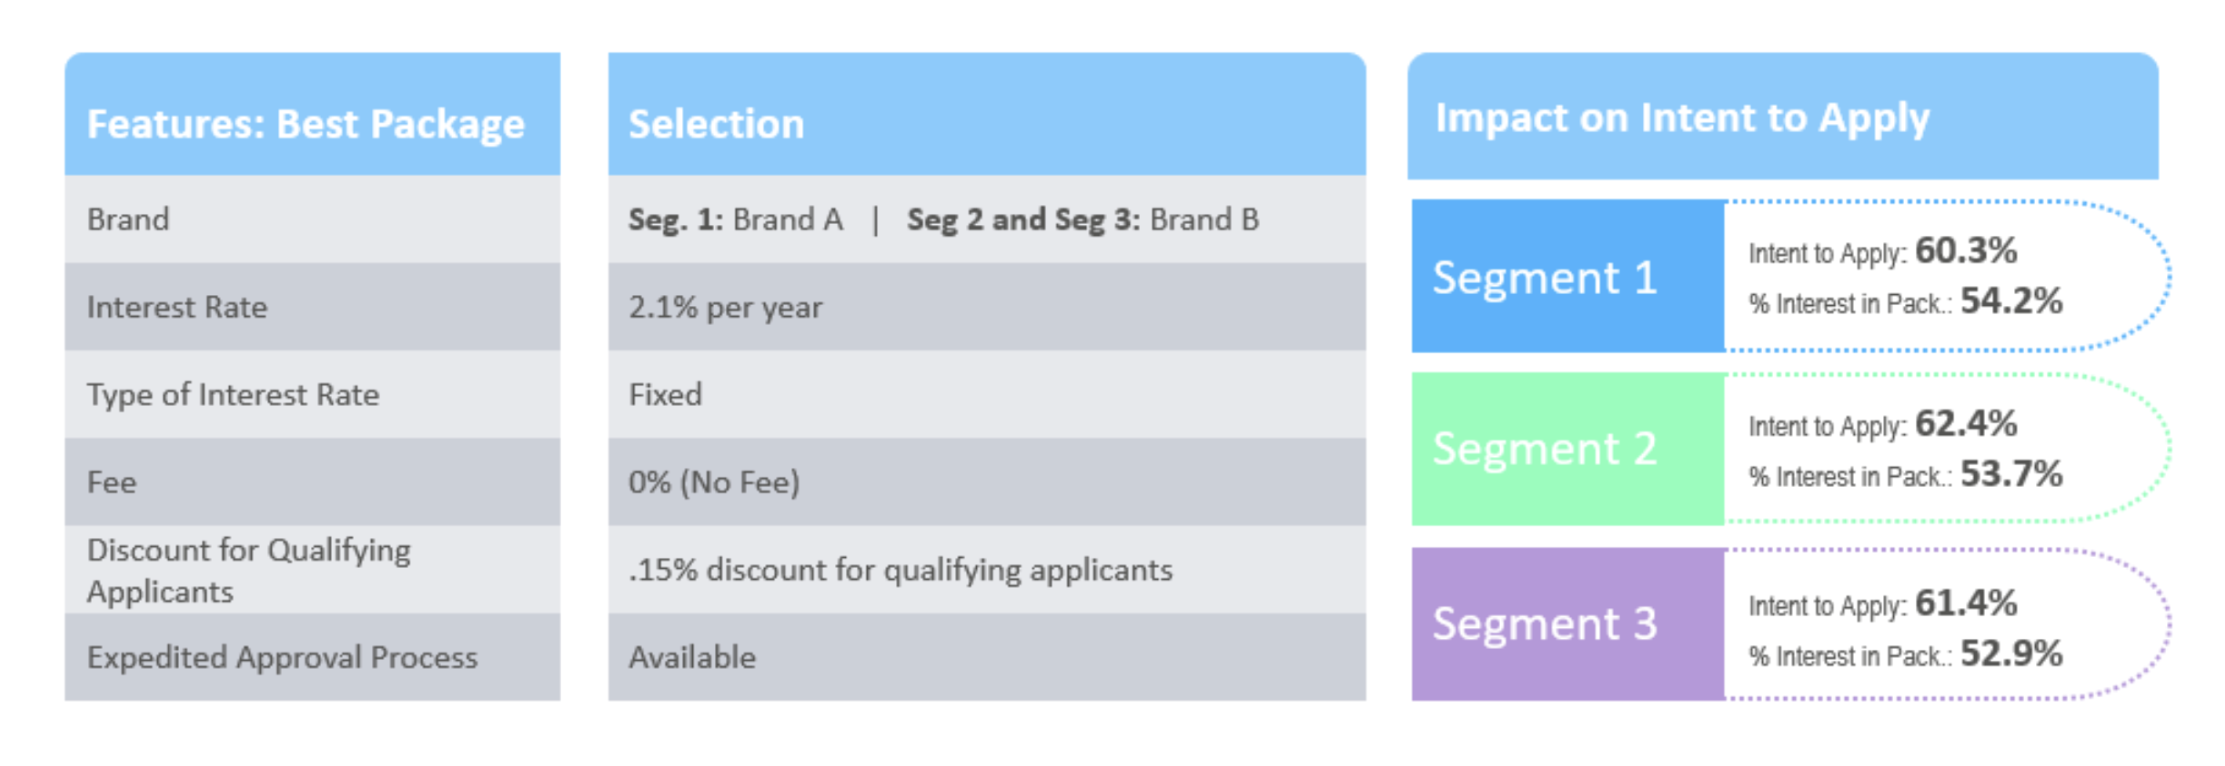 New Product Development Impact on Intent to Apply Features: Best Package